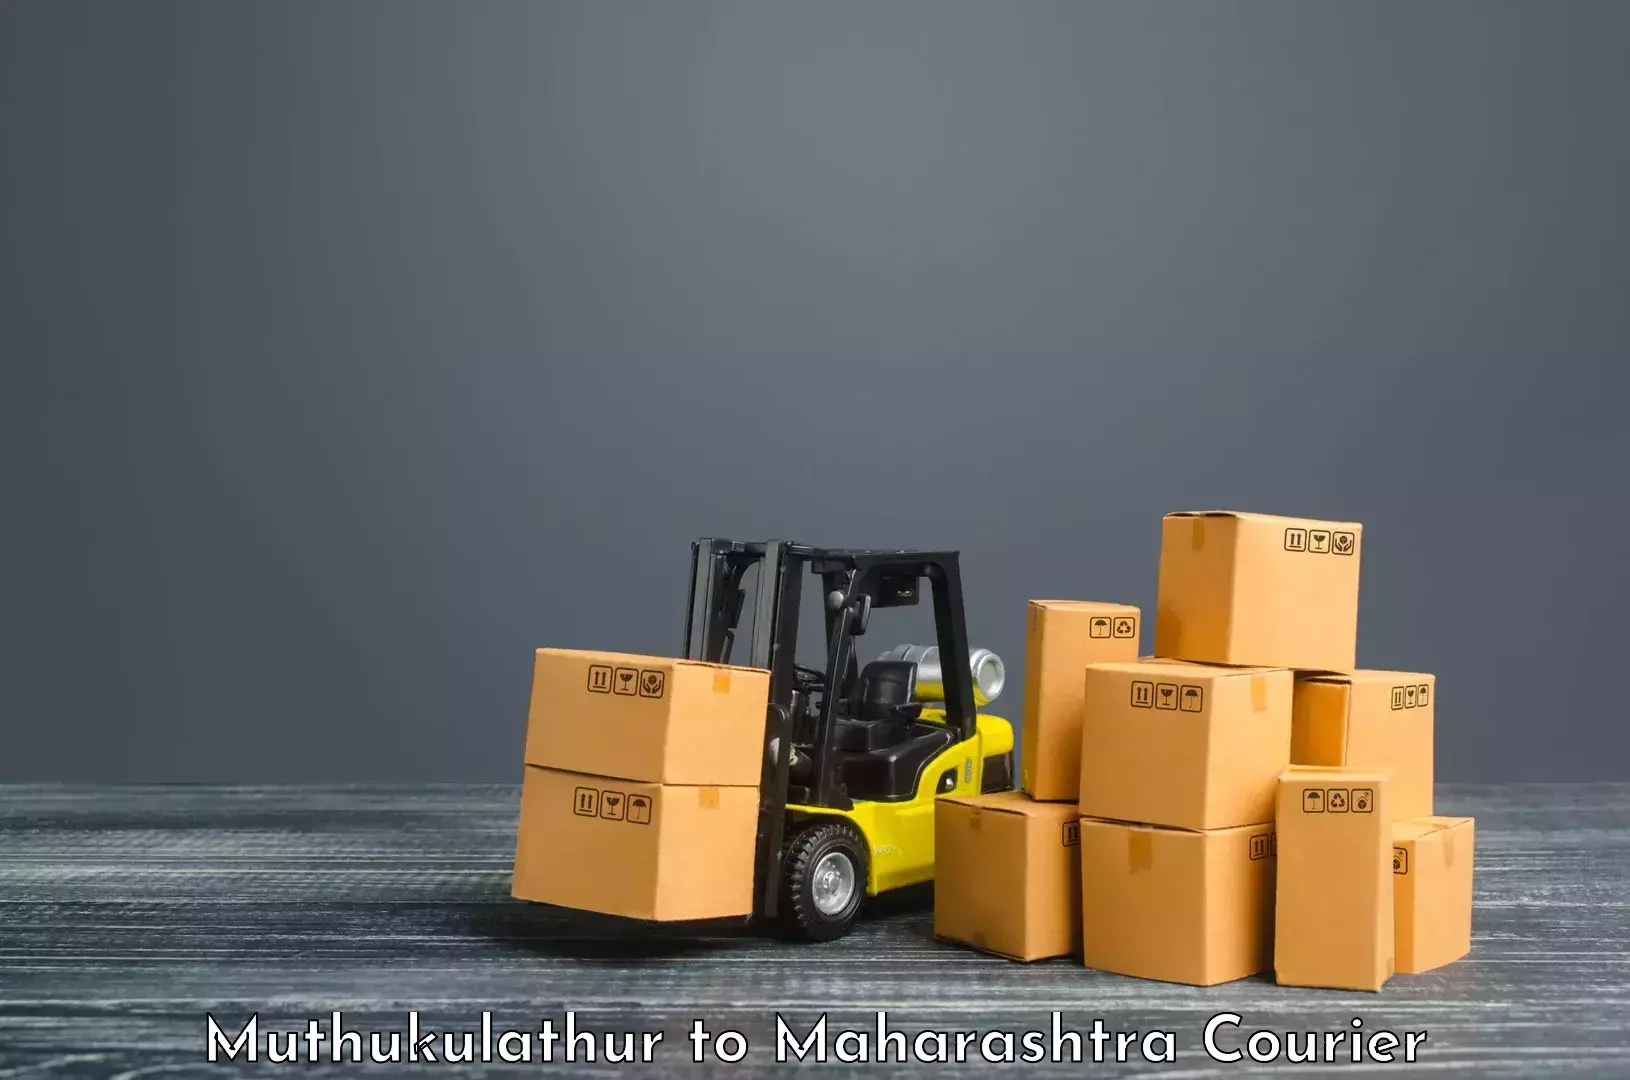 High-capacity parcel service Muthukulathur to Mul